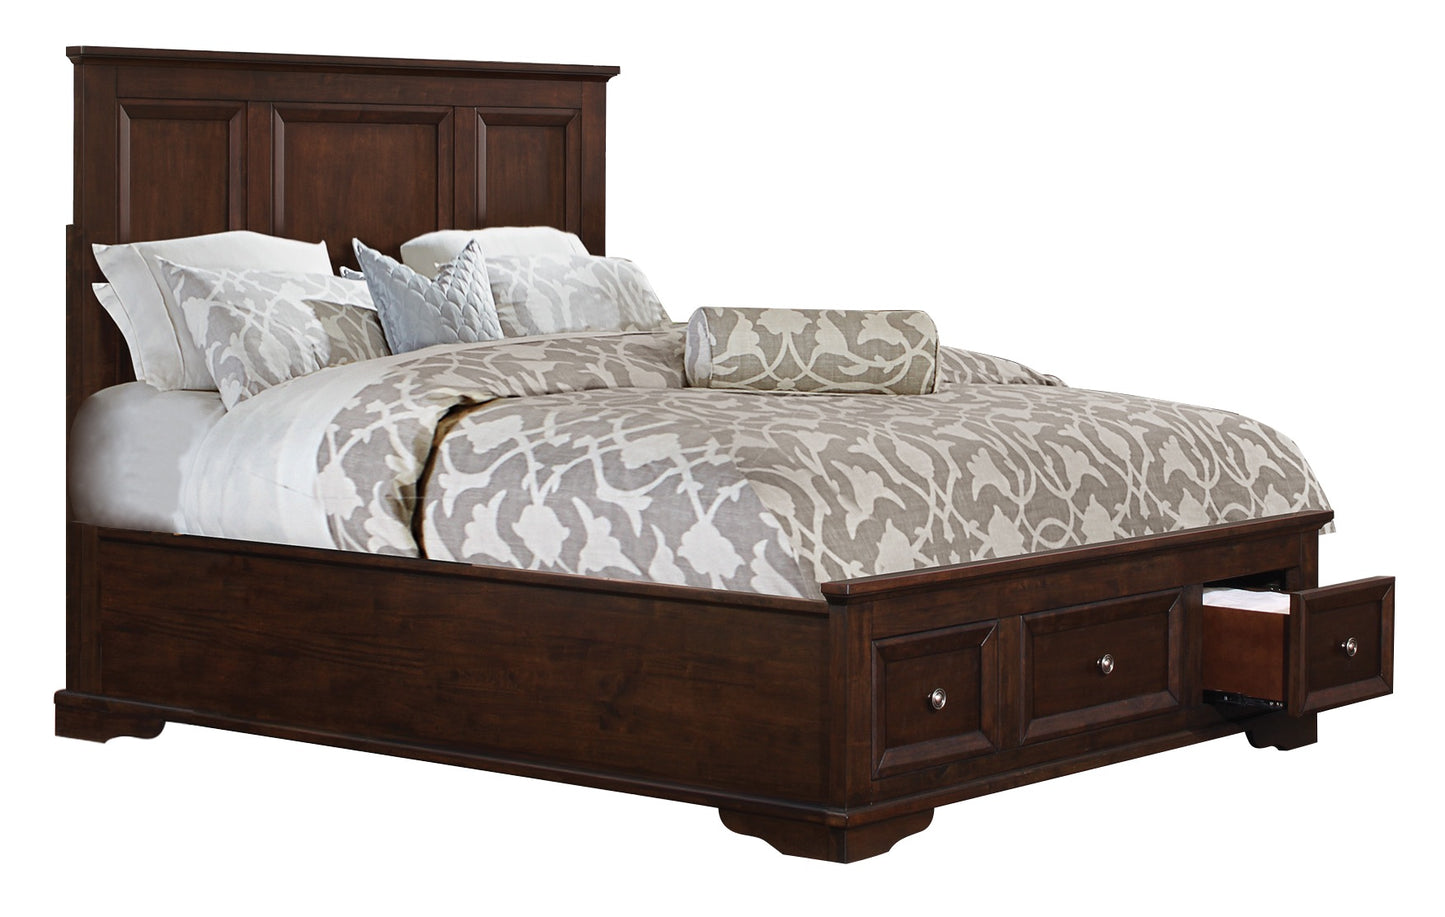 Elista Rustic Country Cal King Platform Bed with Footboard Storage in Espresso